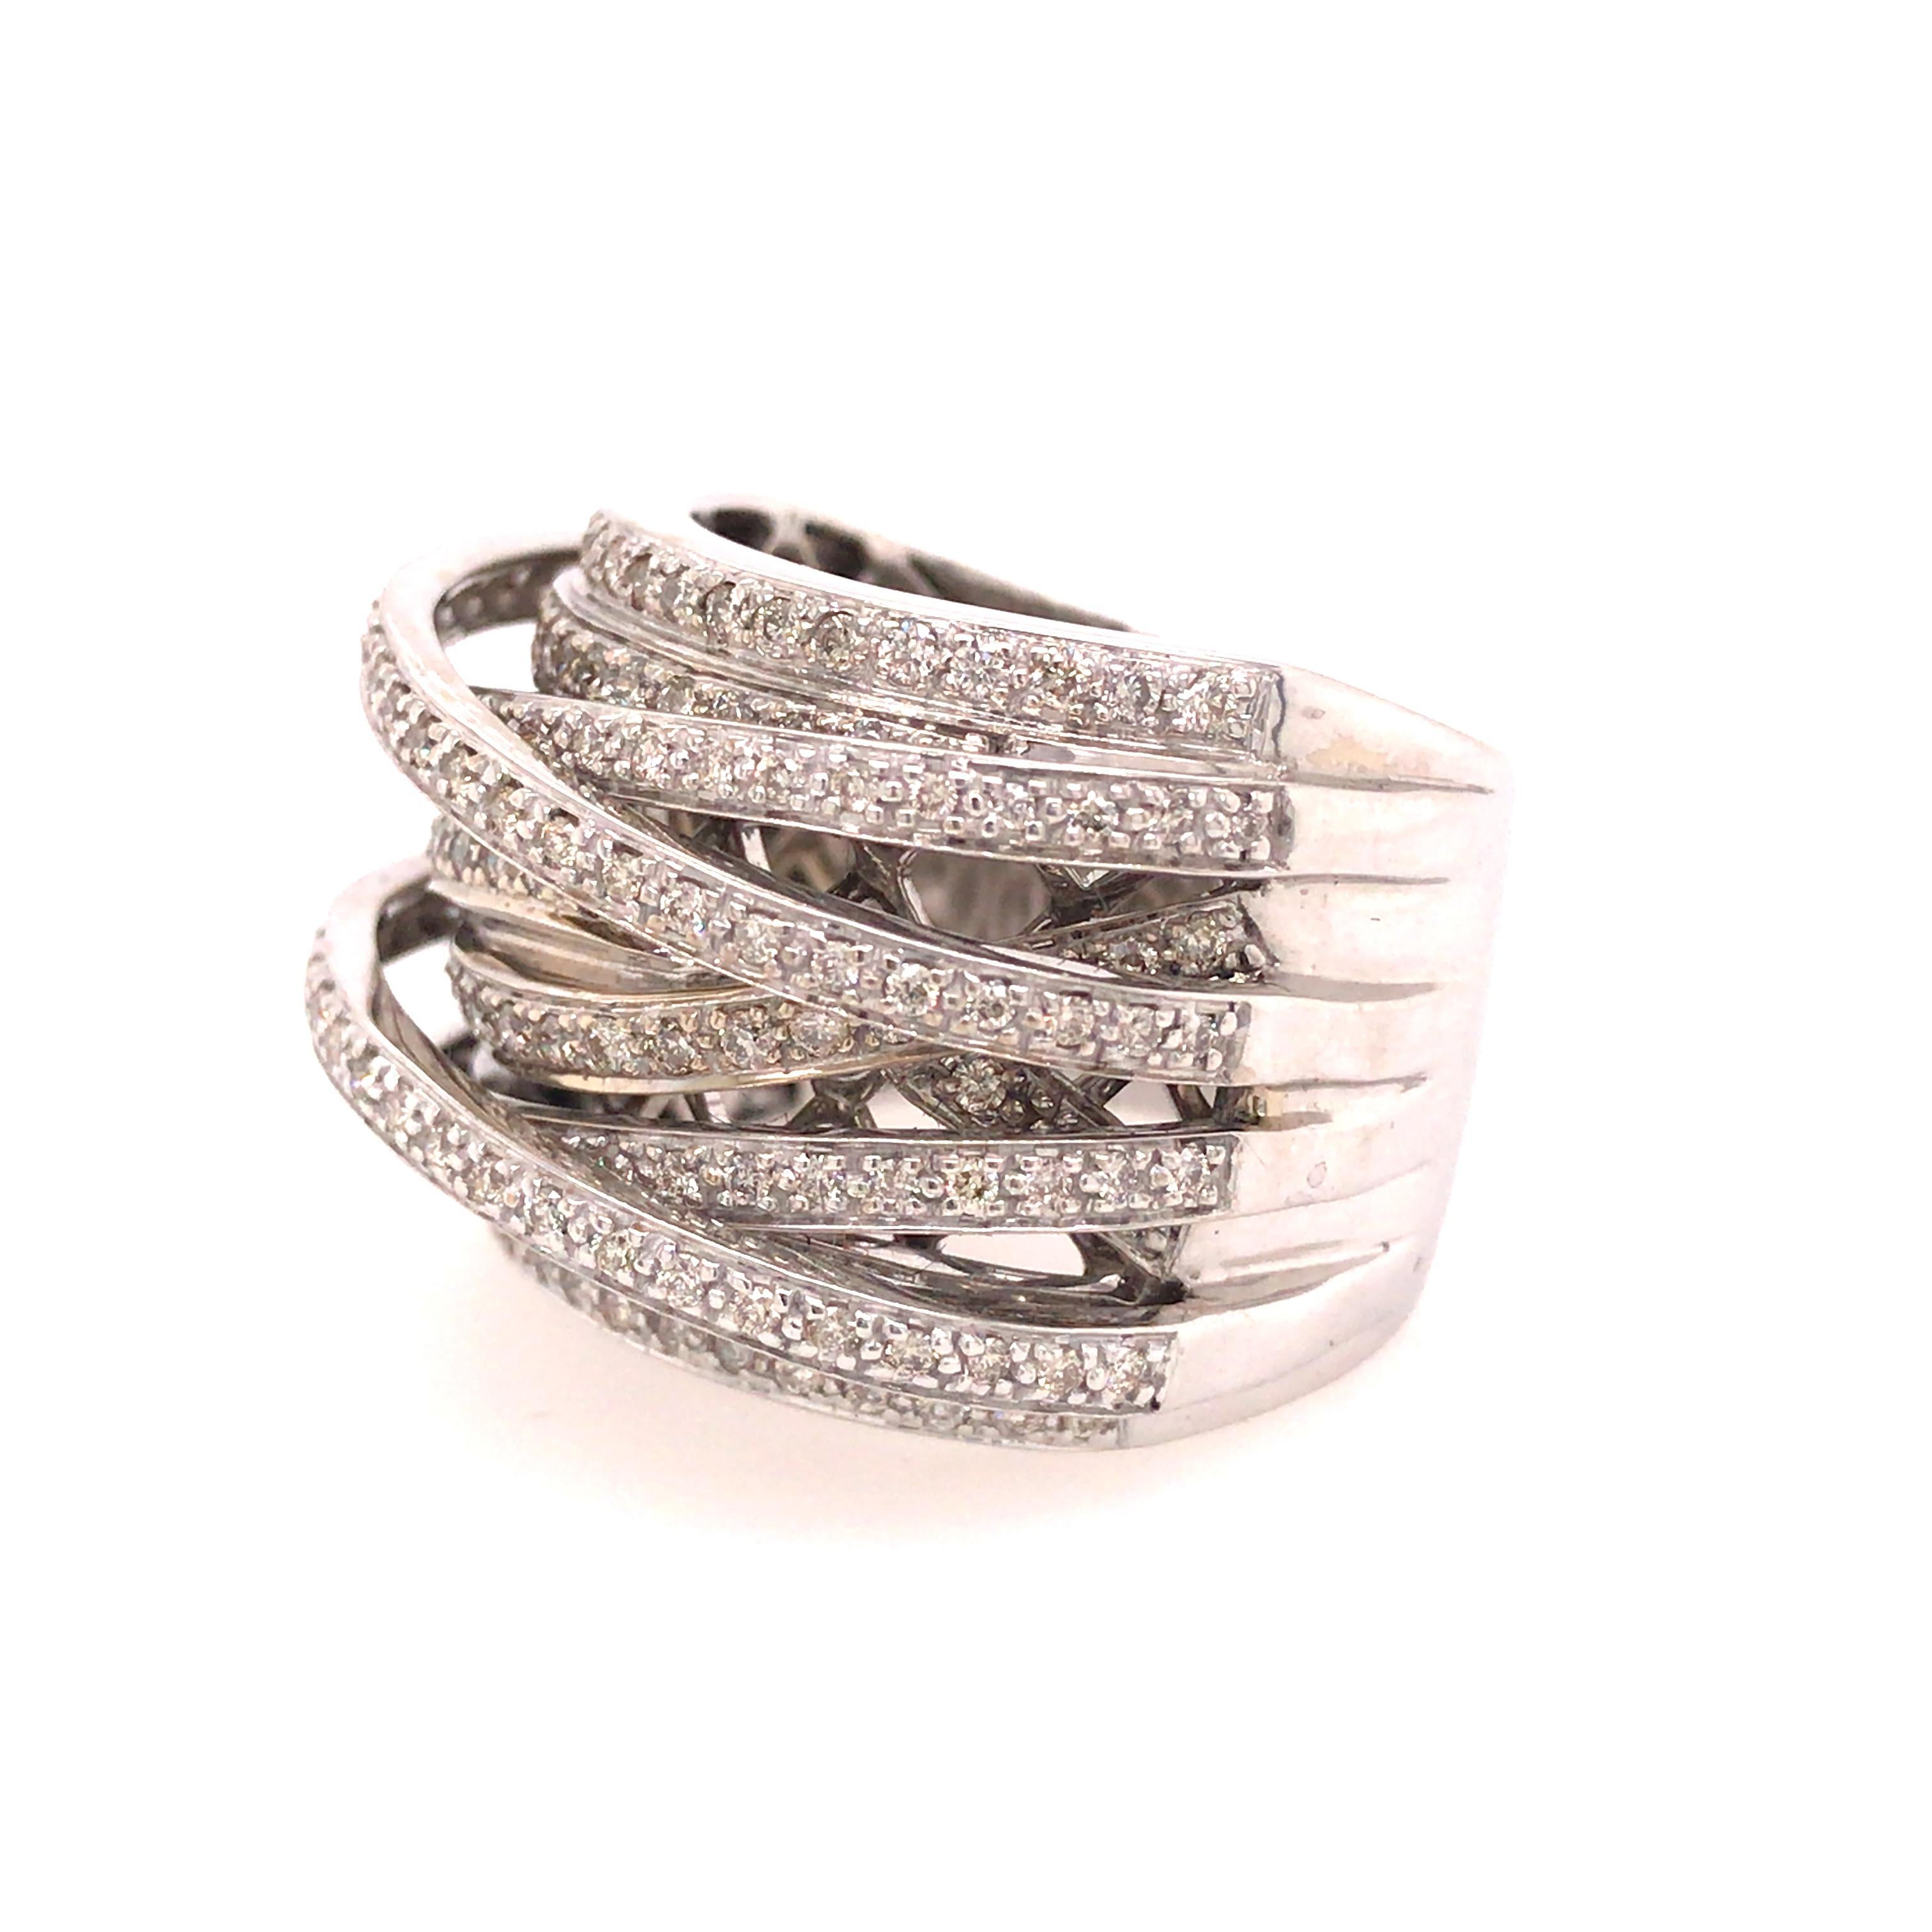 Wide Multi-Row Diamond Band in 14K White Gold.  Round Brilliant Cut Diamonds weighing 1.60 carat total weight, G-H in color and VS-SI in clarity are expertly set.  The Ring measures 3/4 inch in width and 5/16 inch in height.  Ring size 9 1/2. 21.77